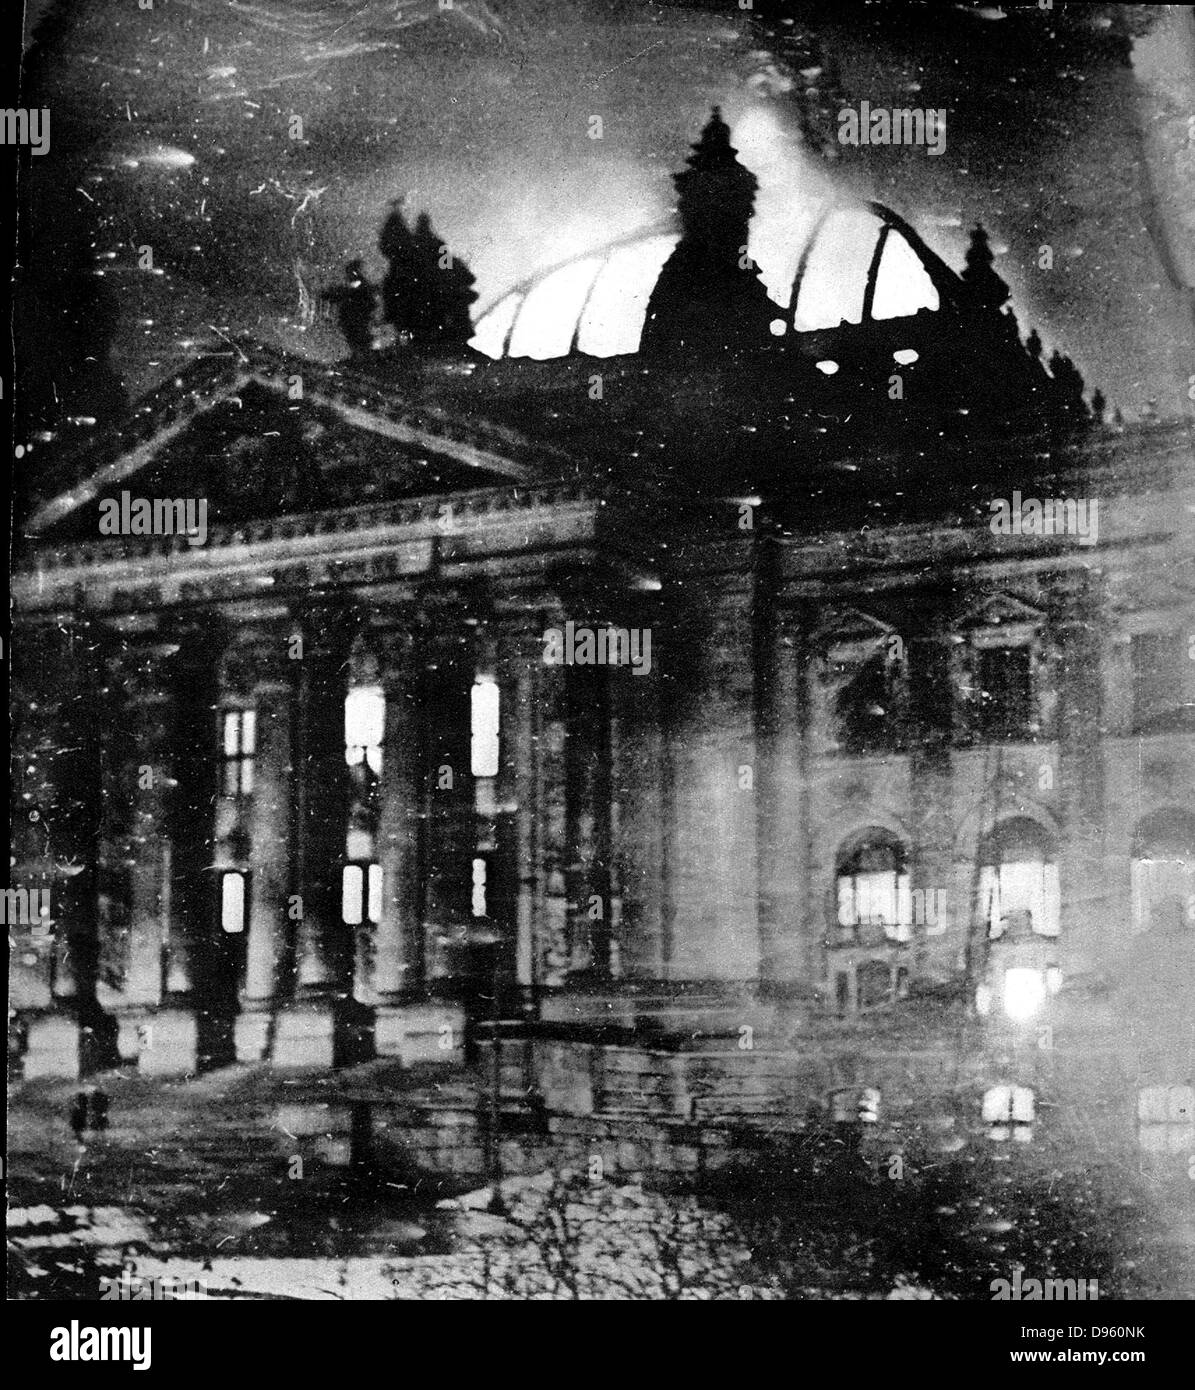 On 27 February 1933, the Reichstag building was subject to an arson attack.  This event was pivotal in the establishment of Nazi Germany. Stock Photo